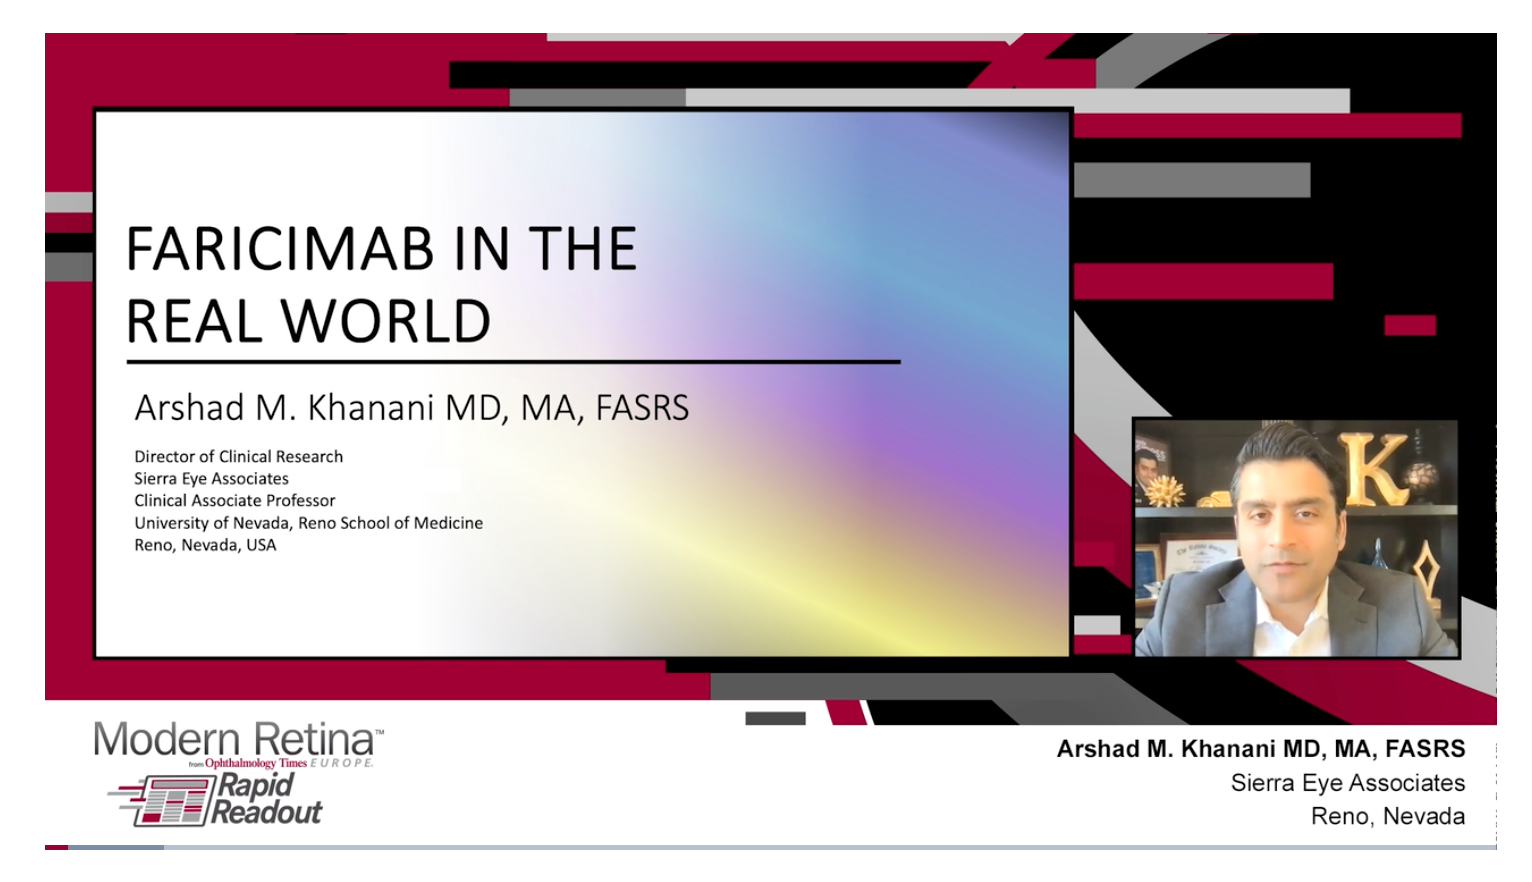 A screenshot from "Learnings from Real World Evidence of Faricimab in nAMD and DME" with Arshad M. Khanani, MD, MA, FASRS